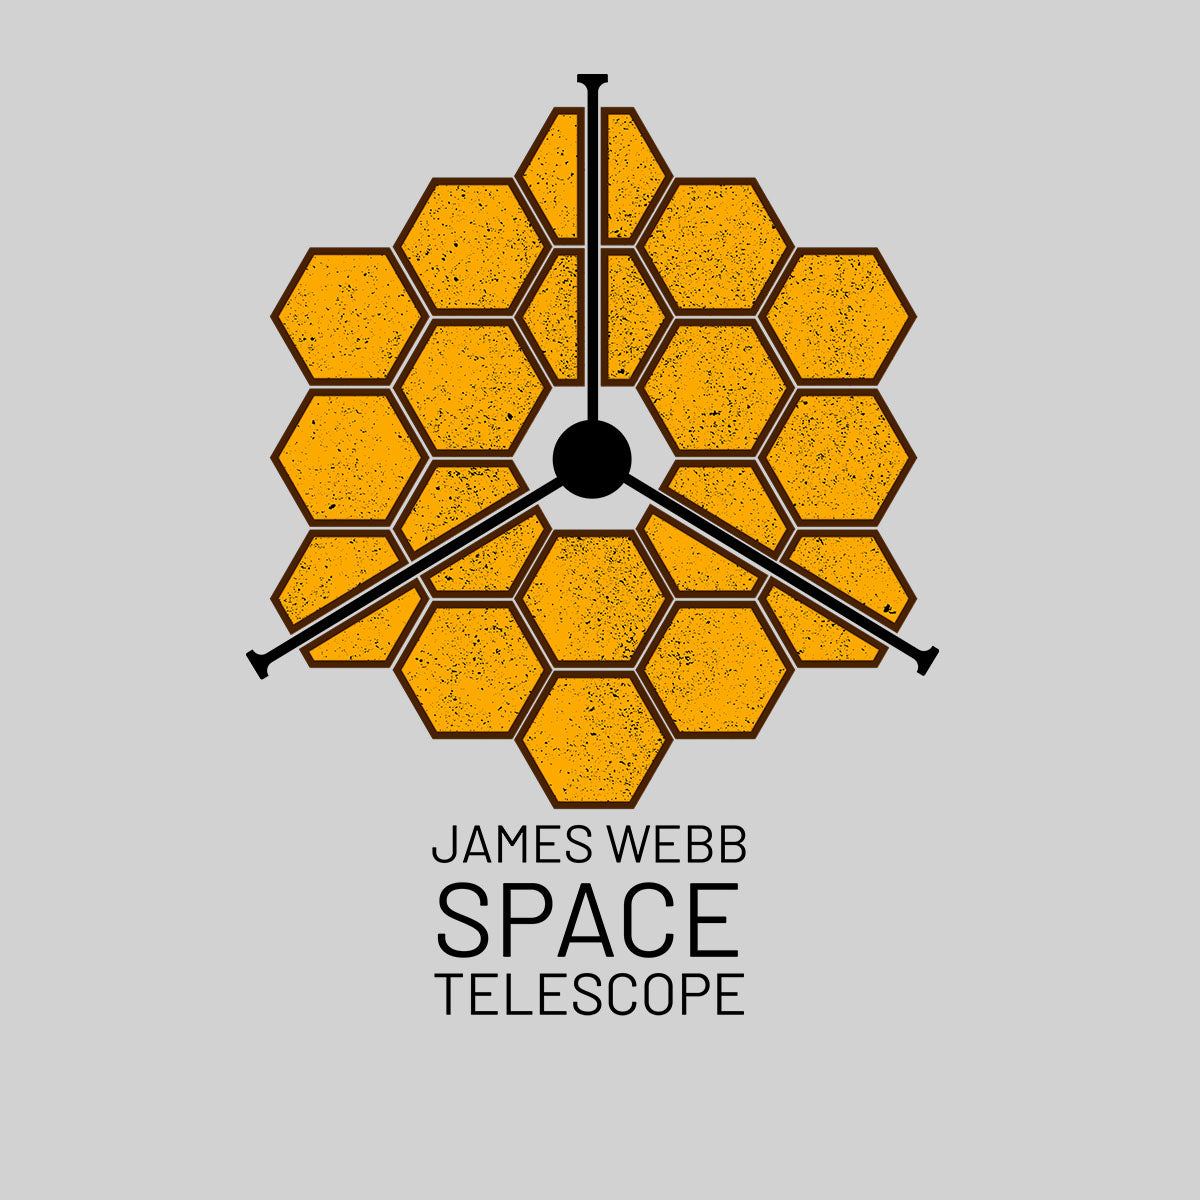 James Webb Space Telescope T-shirt Short Sleeve - I'm Going To Outer Space Unisex T-shirt - Kuzi Tees